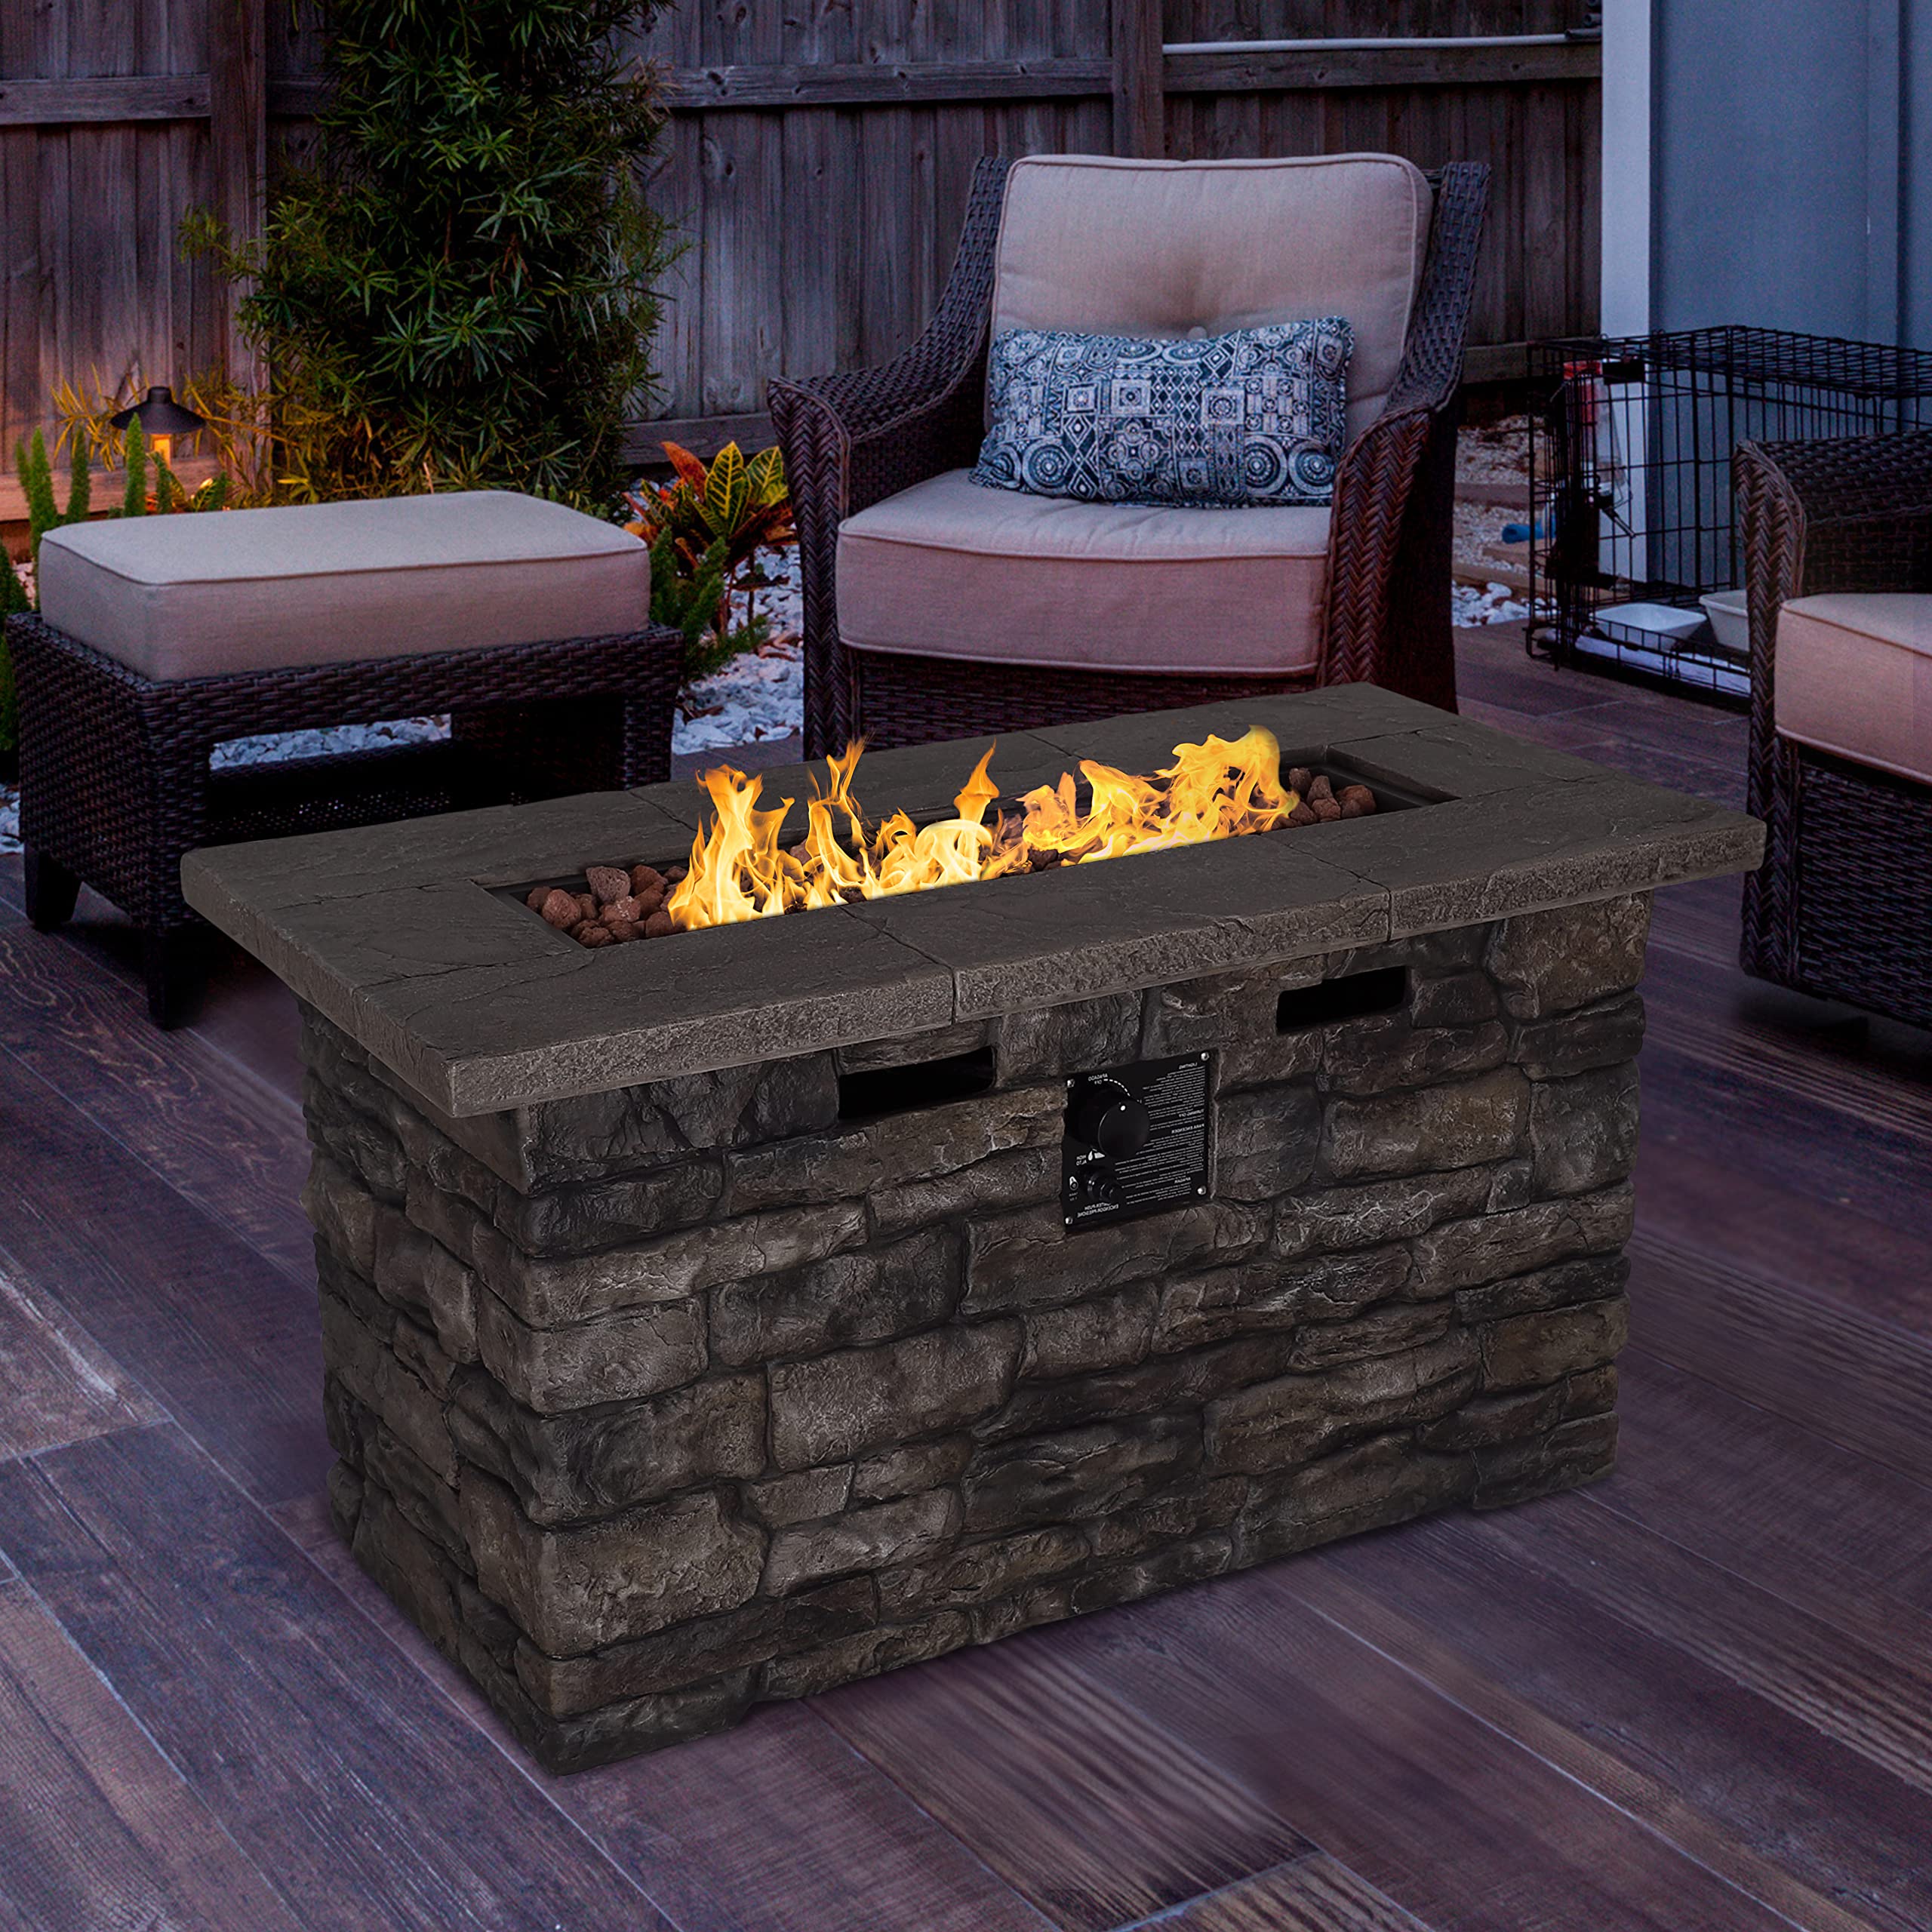 VEIKOUS 46'' Outdoor Rectangle Propane Gas Fire Pit Table with Lid, Cover, Free Lava Rocks and Stone Finish Design, 50000 BTU Stainless Steel Burner and Hose